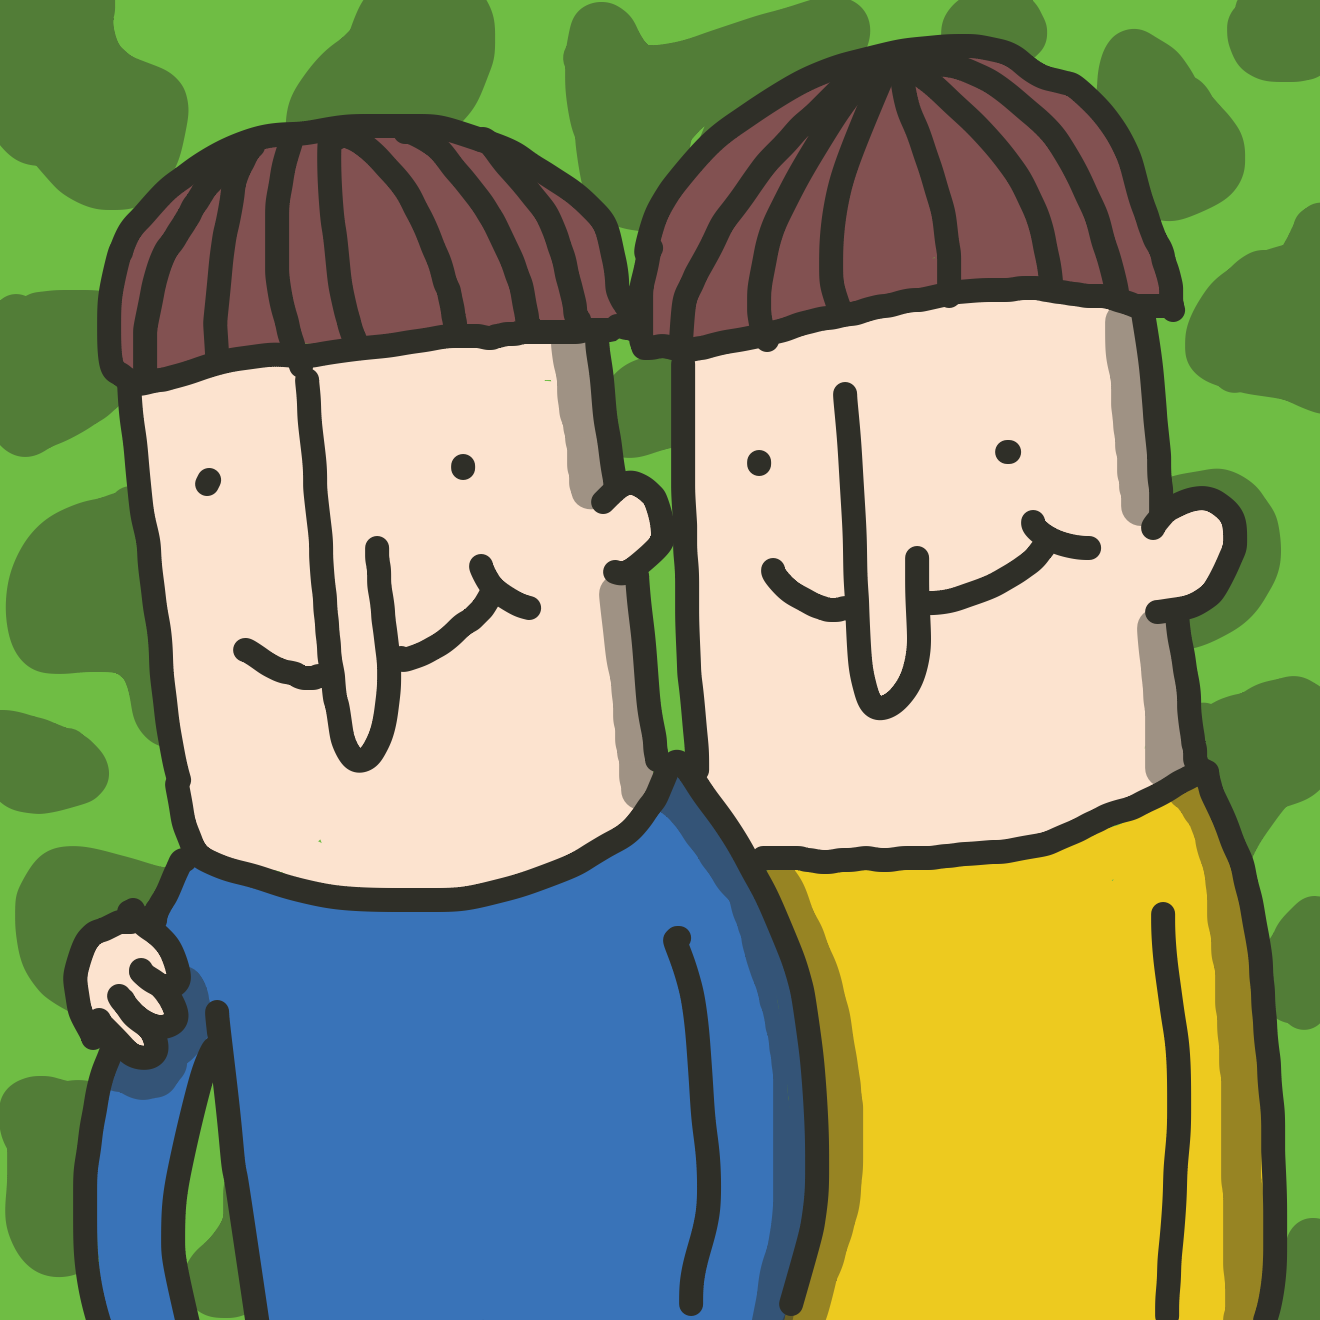 Just two brothers. - Online Drawing Game Comic Strip Panel by joshyouart